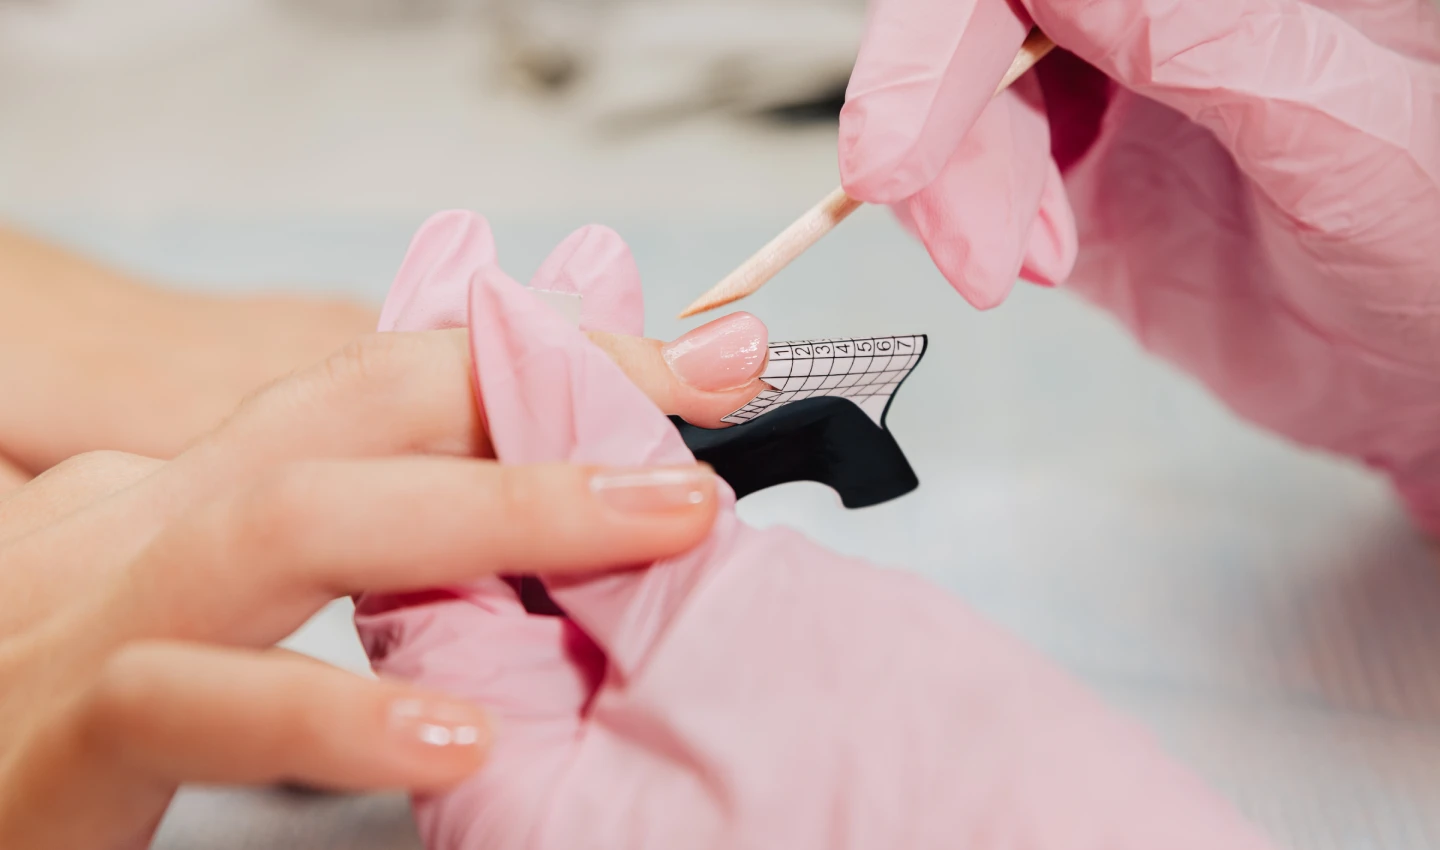 Image of the manicure process where the master forms an artificial nail from a special gel using a bamboo stick for unchippable gel manicures.